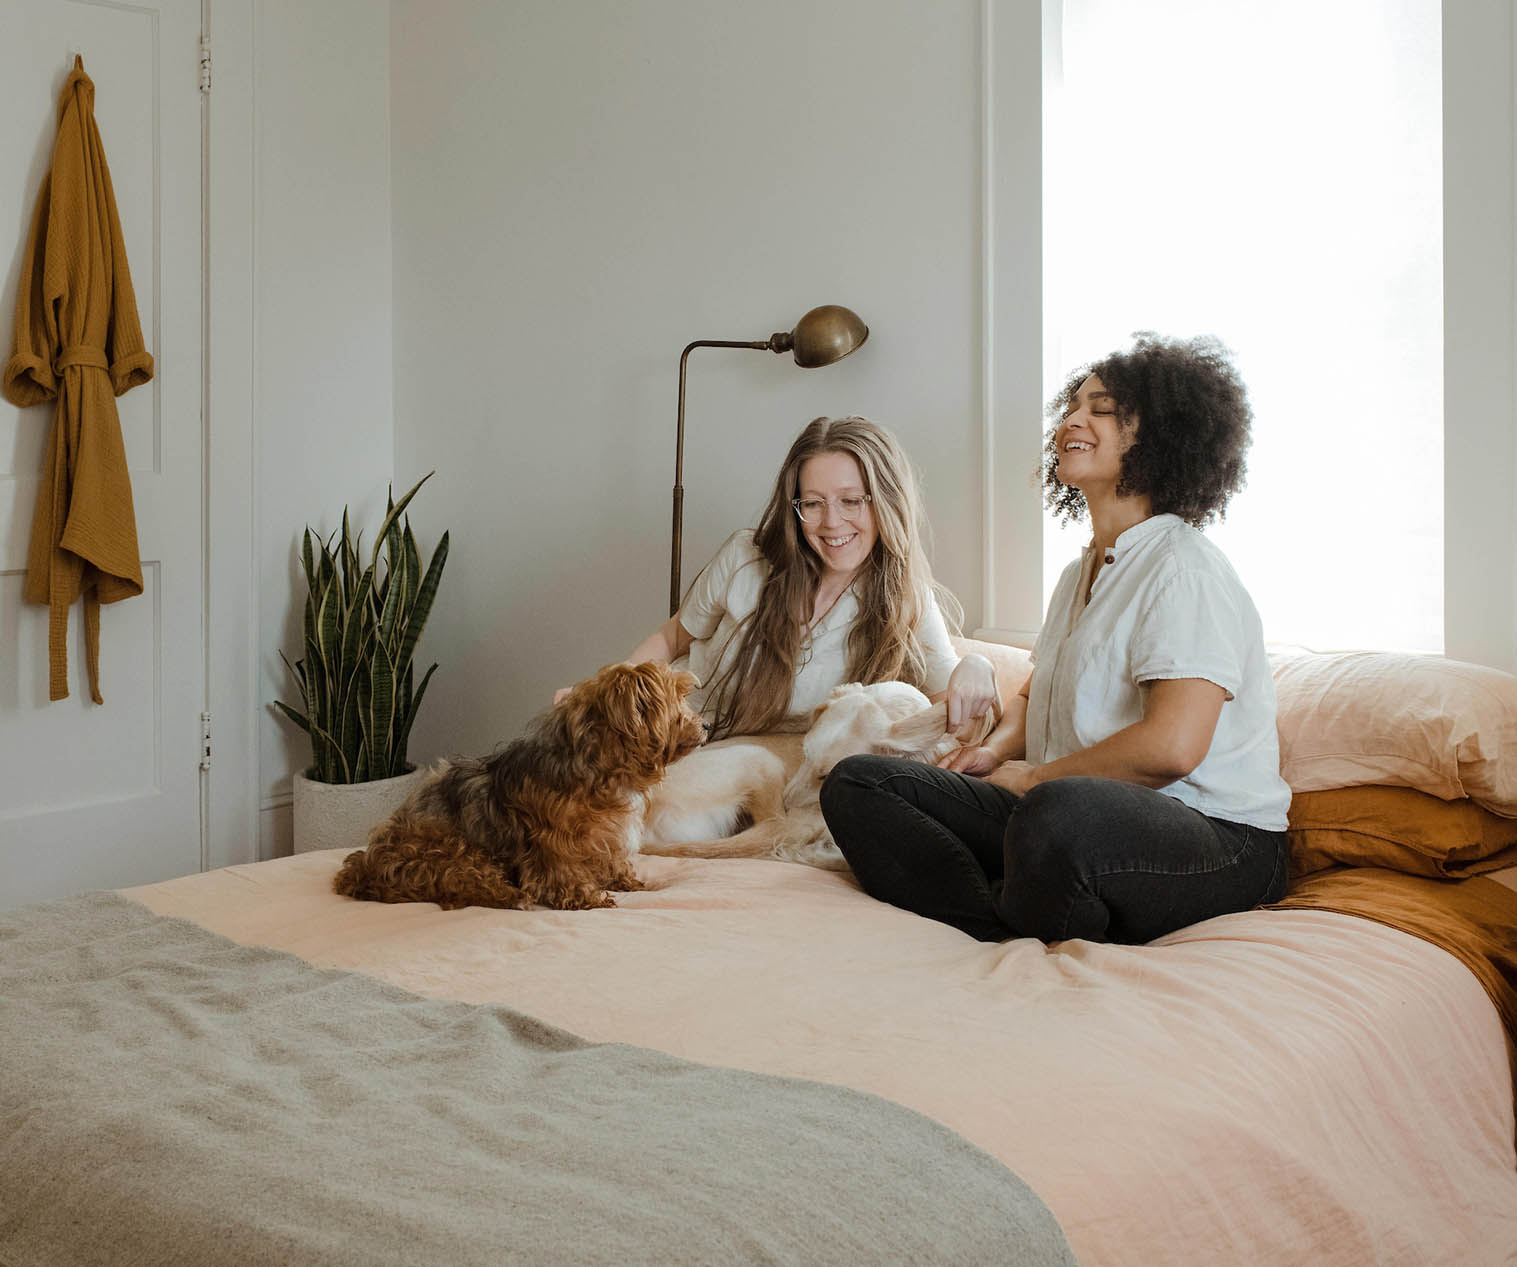 Female friends and dog sitting together on bed